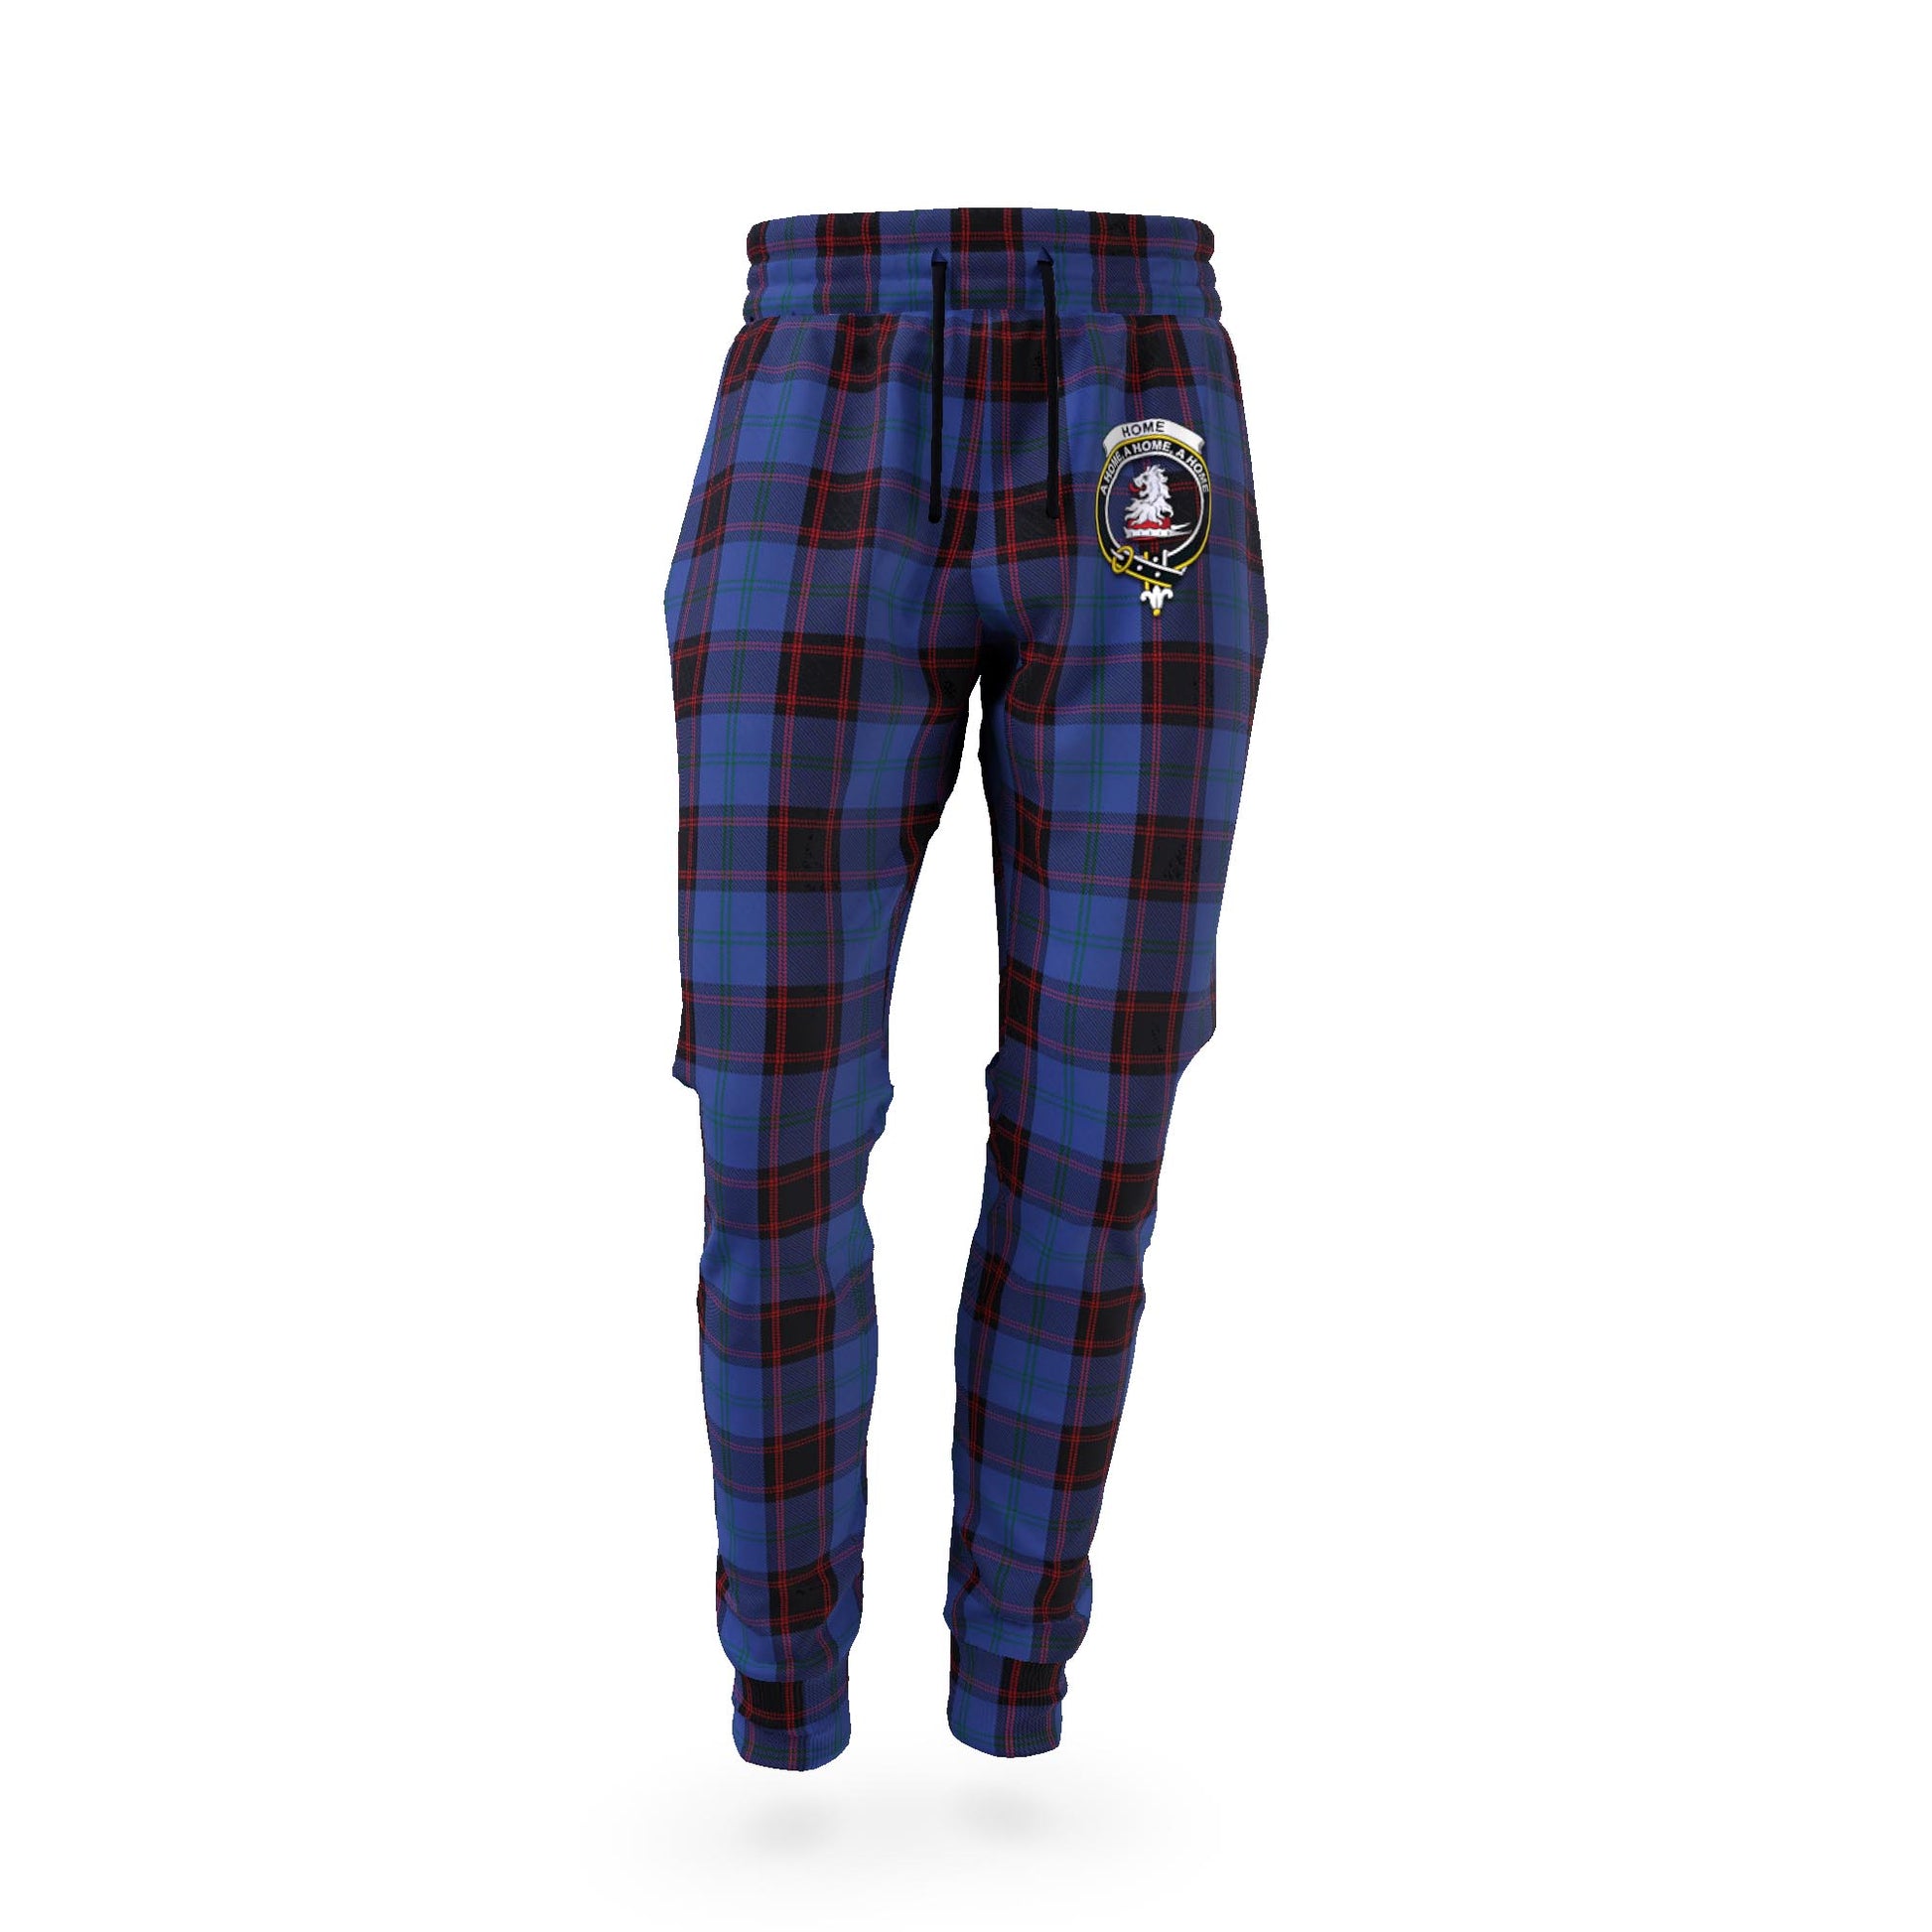 Home (Hume) Tartan Joggers Pants with Family Crest - Tartanvibesclothing